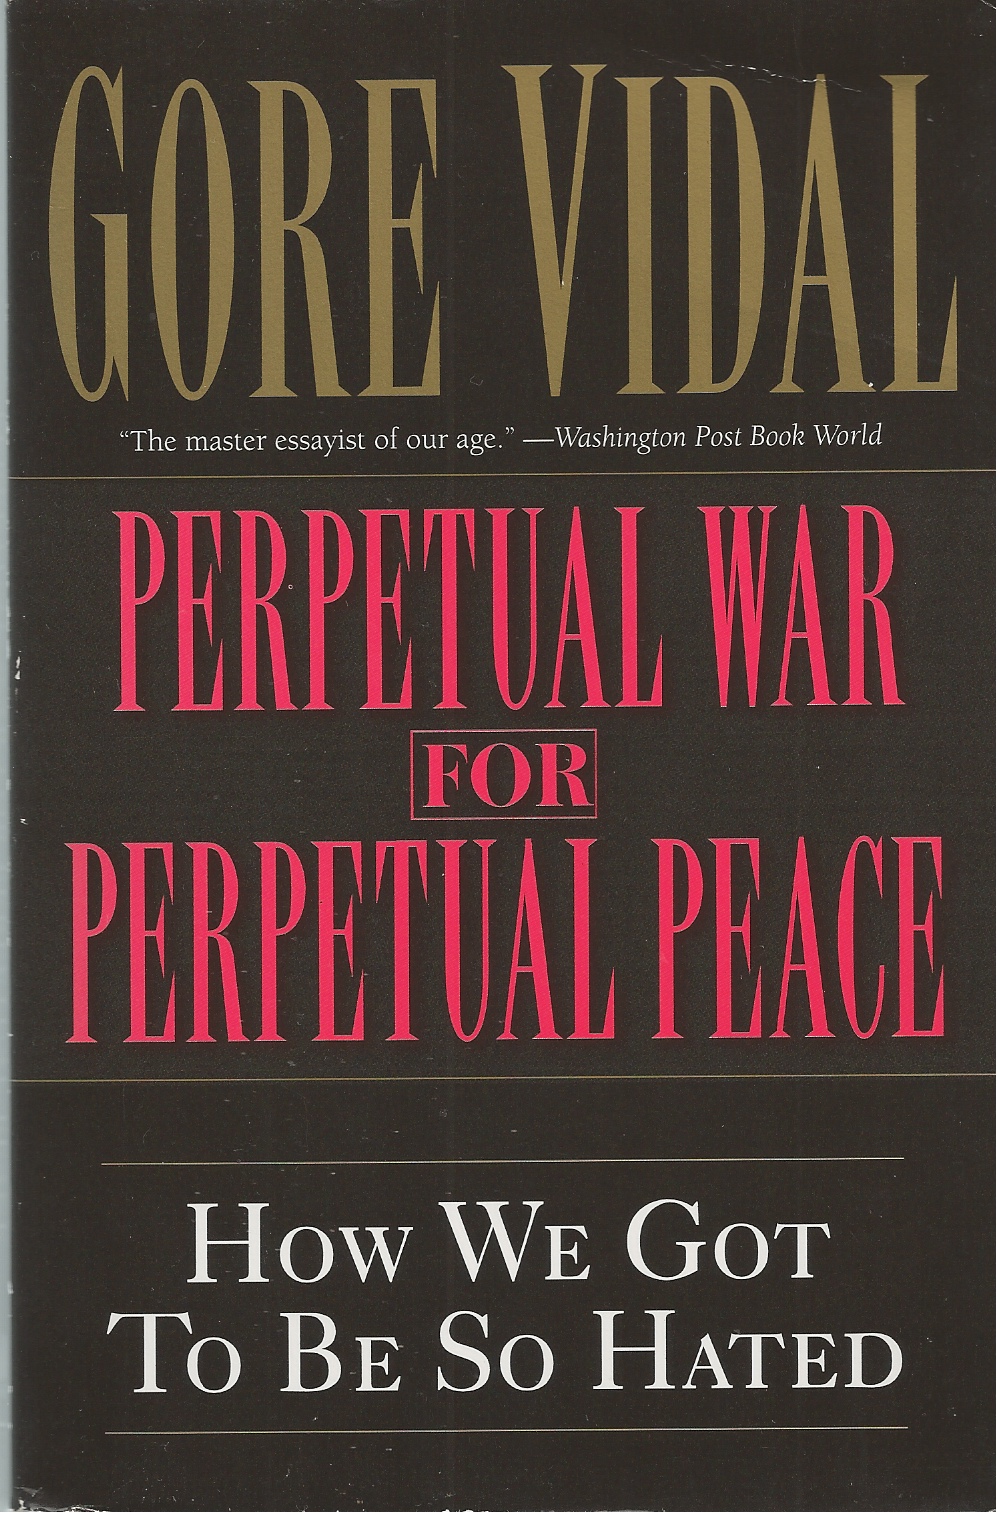 VIDAL, GORE - Perpetual War for Perpetual Peace How We Got to Be So Hated